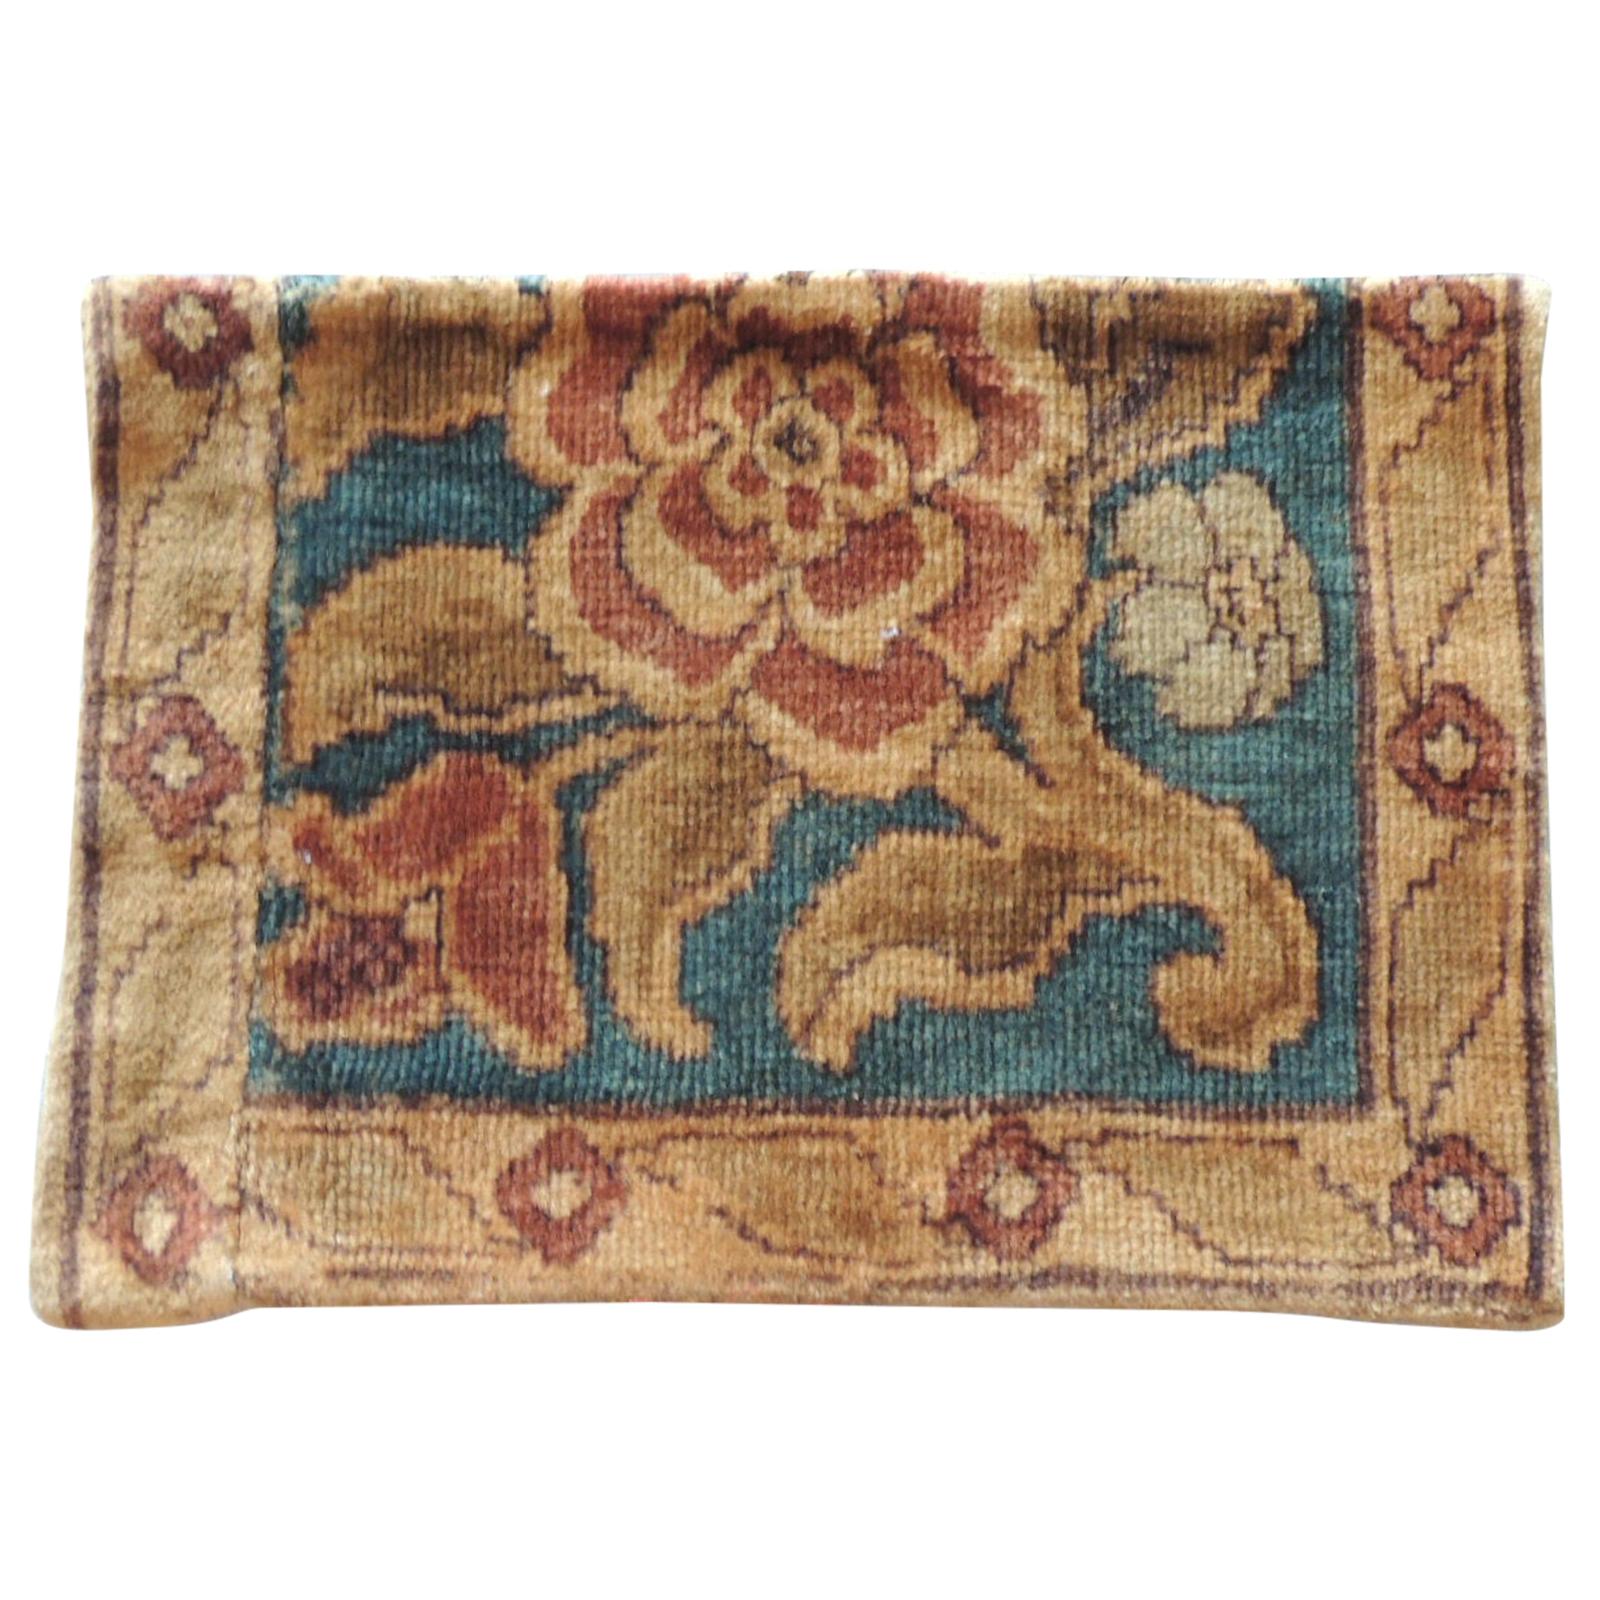 Set of '2' Antique Tapestry Fragments